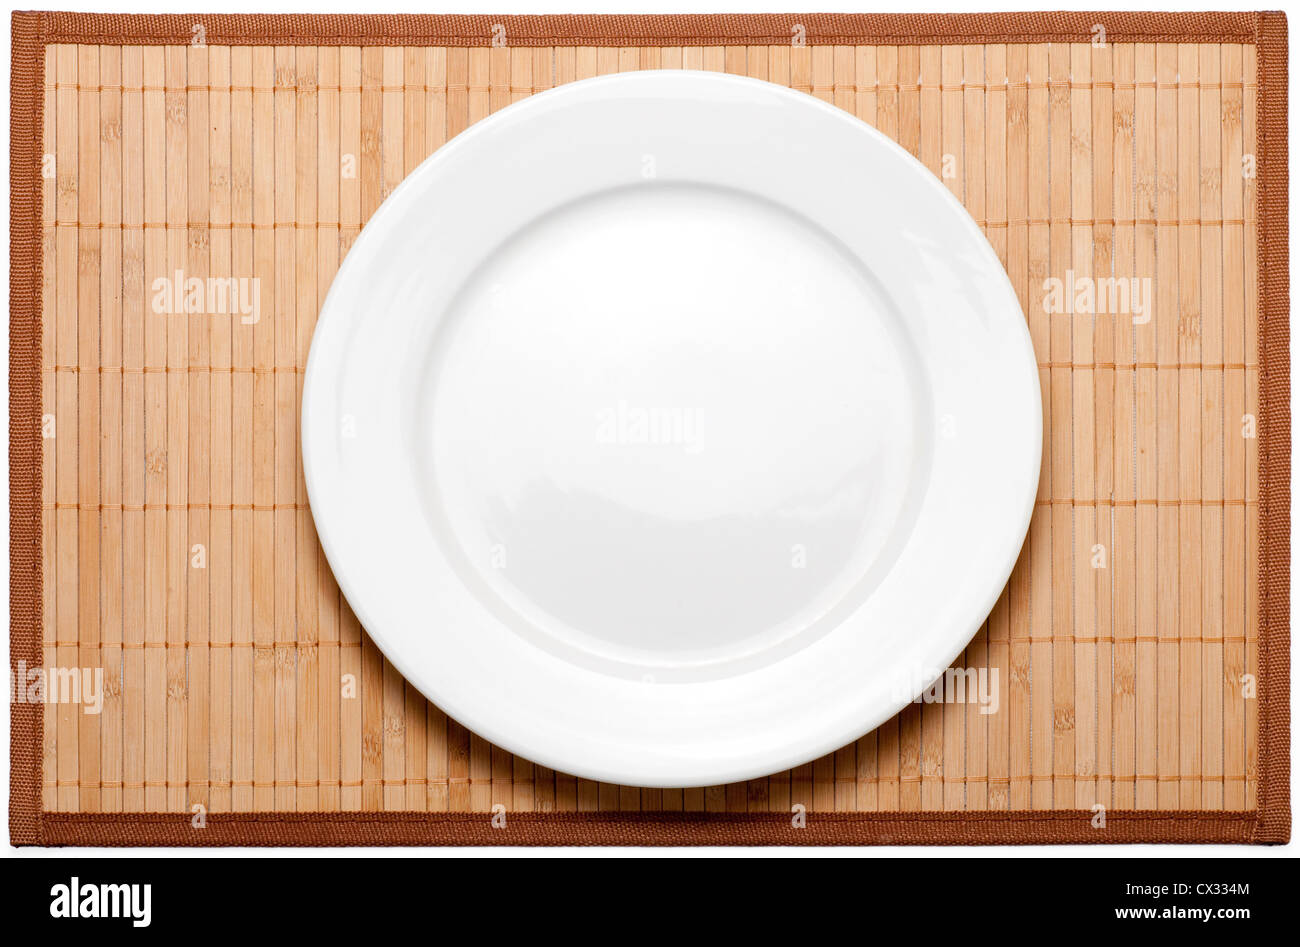 Big white clear plate on bamboo mat Stock Photo